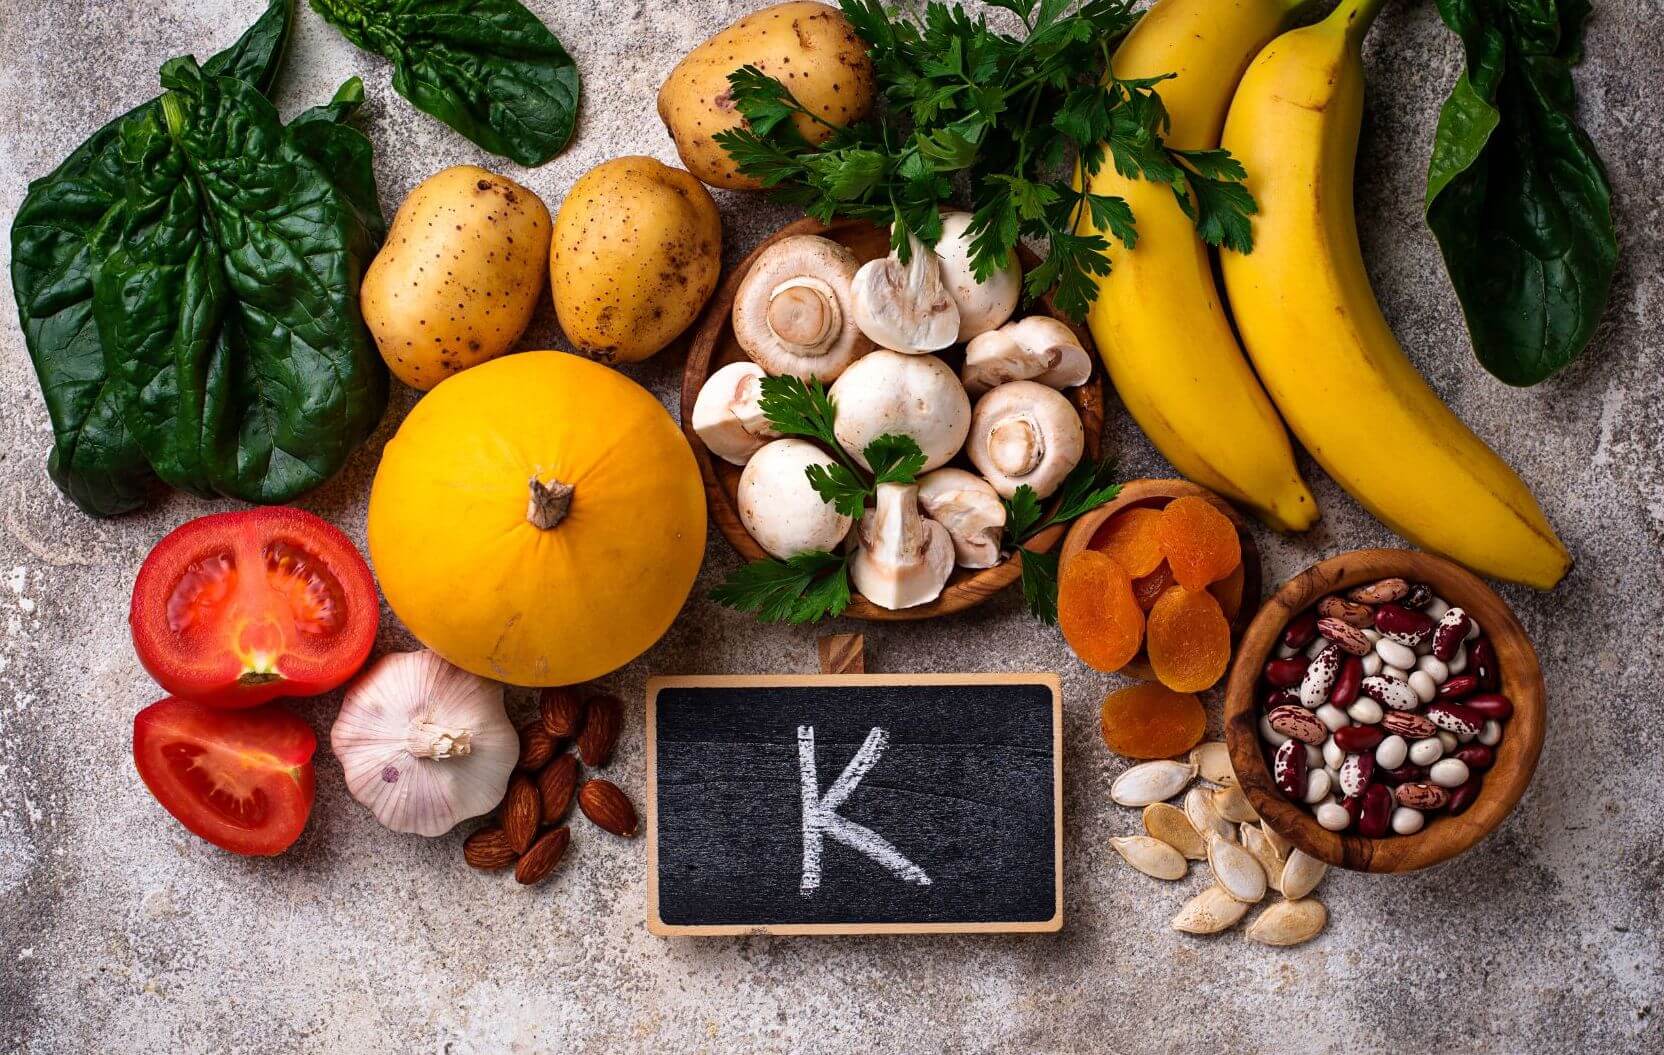 Low potassium foods to illustrate content of our low potassium food list